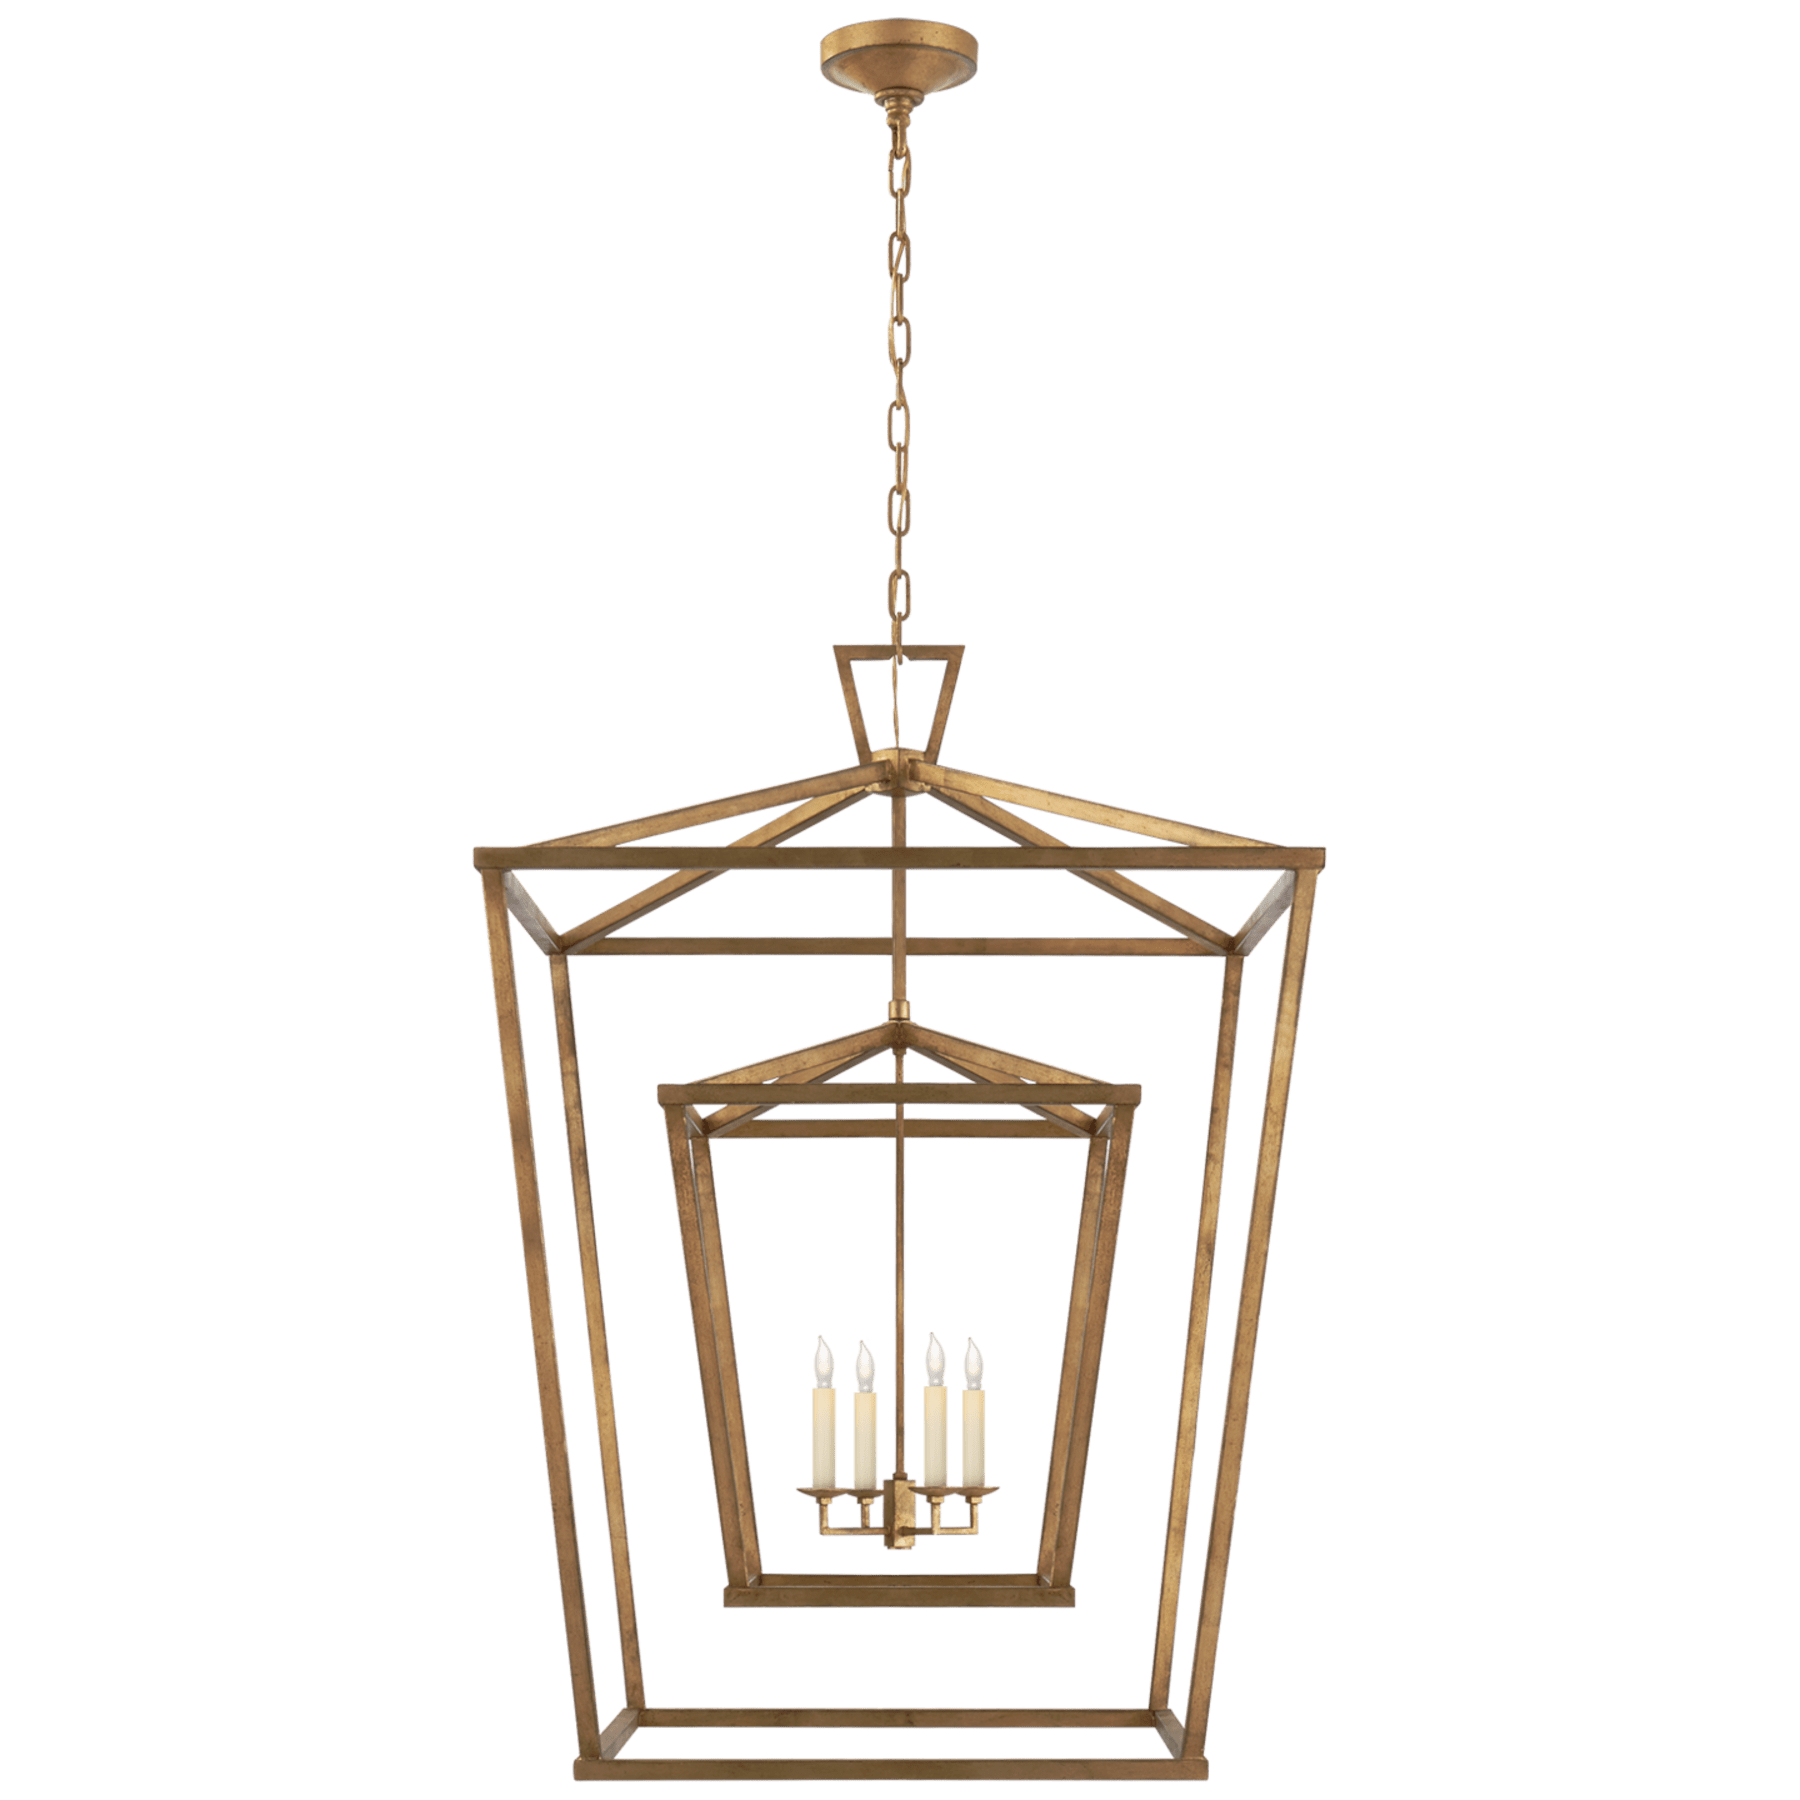 Visual Comfort Darlana Extra Large Double Cage Lantern